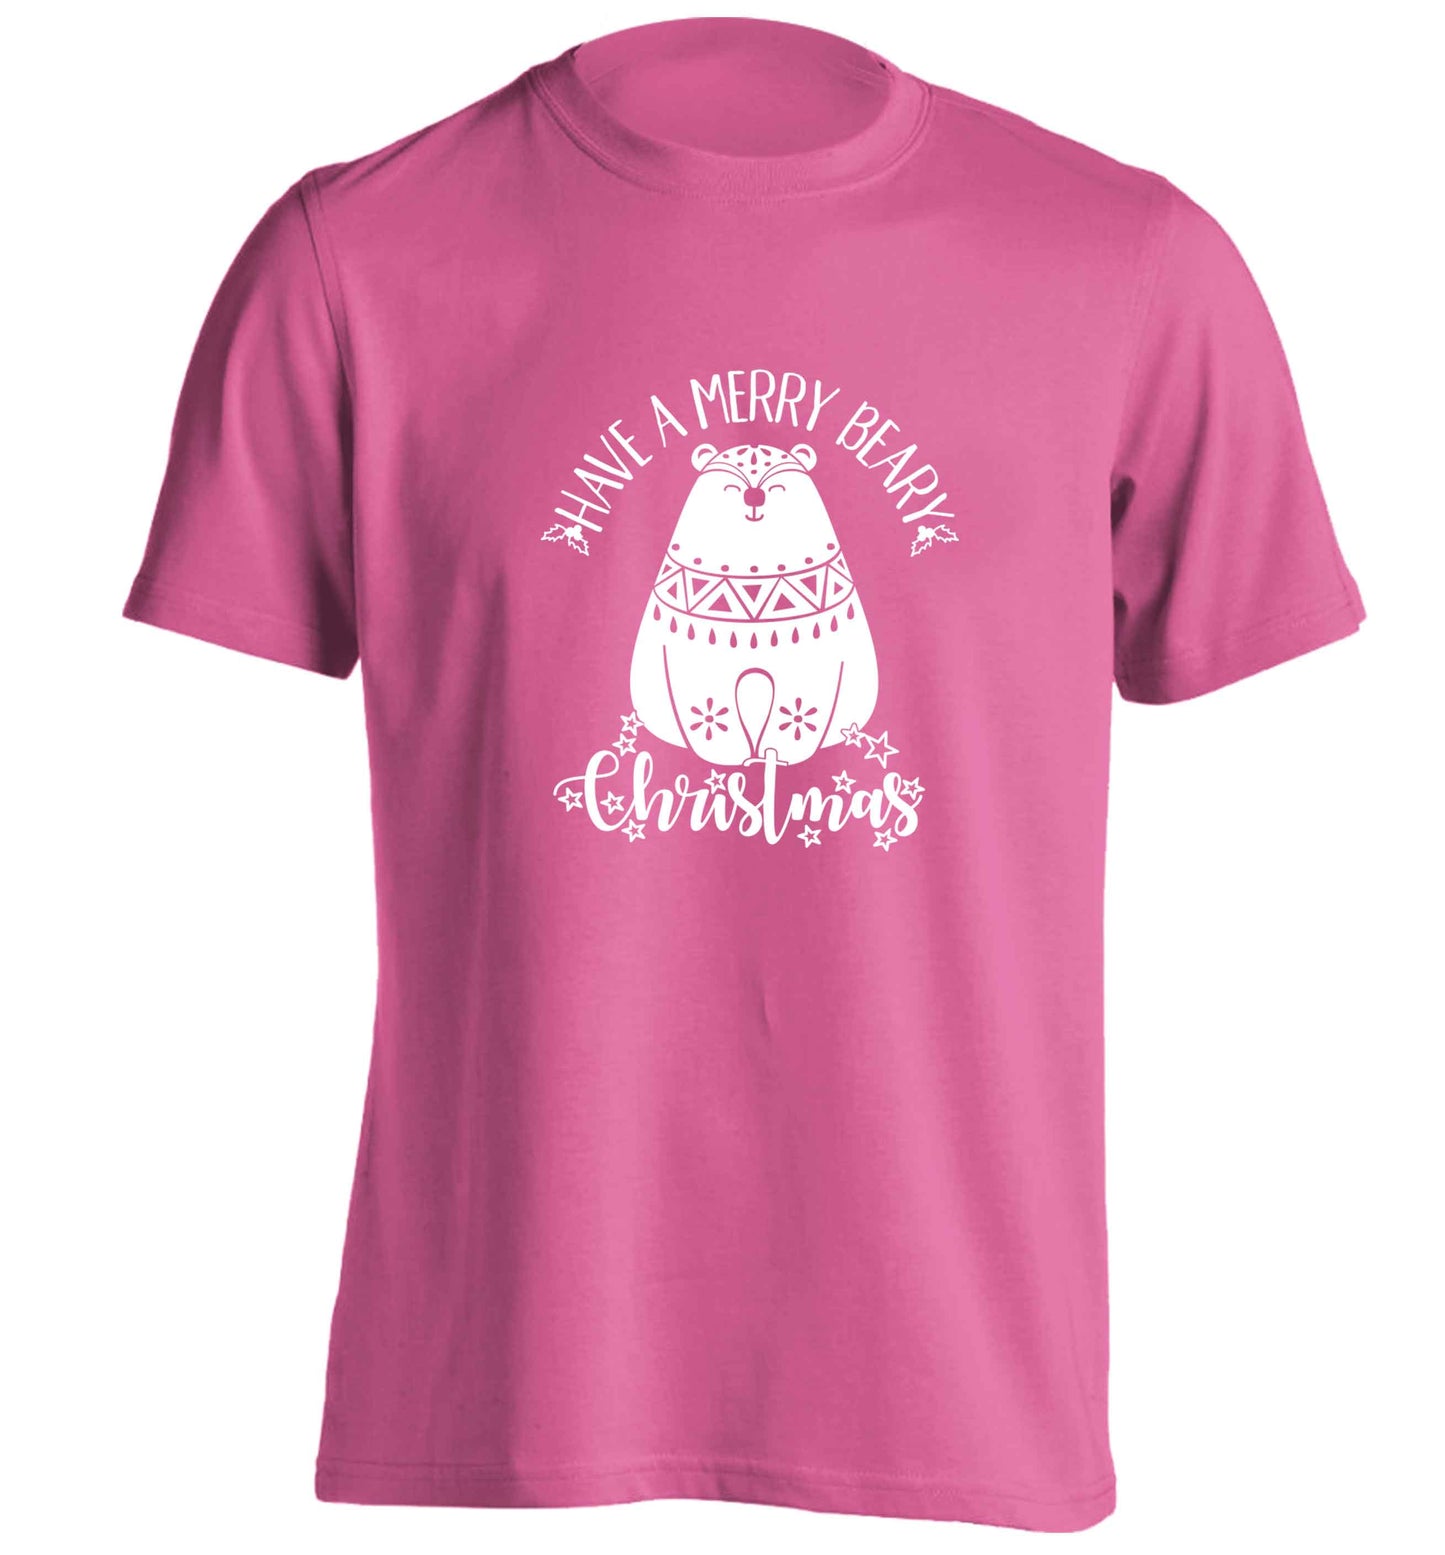 Have a merry beary Christmas adults unisex pink Tshirt 2XL